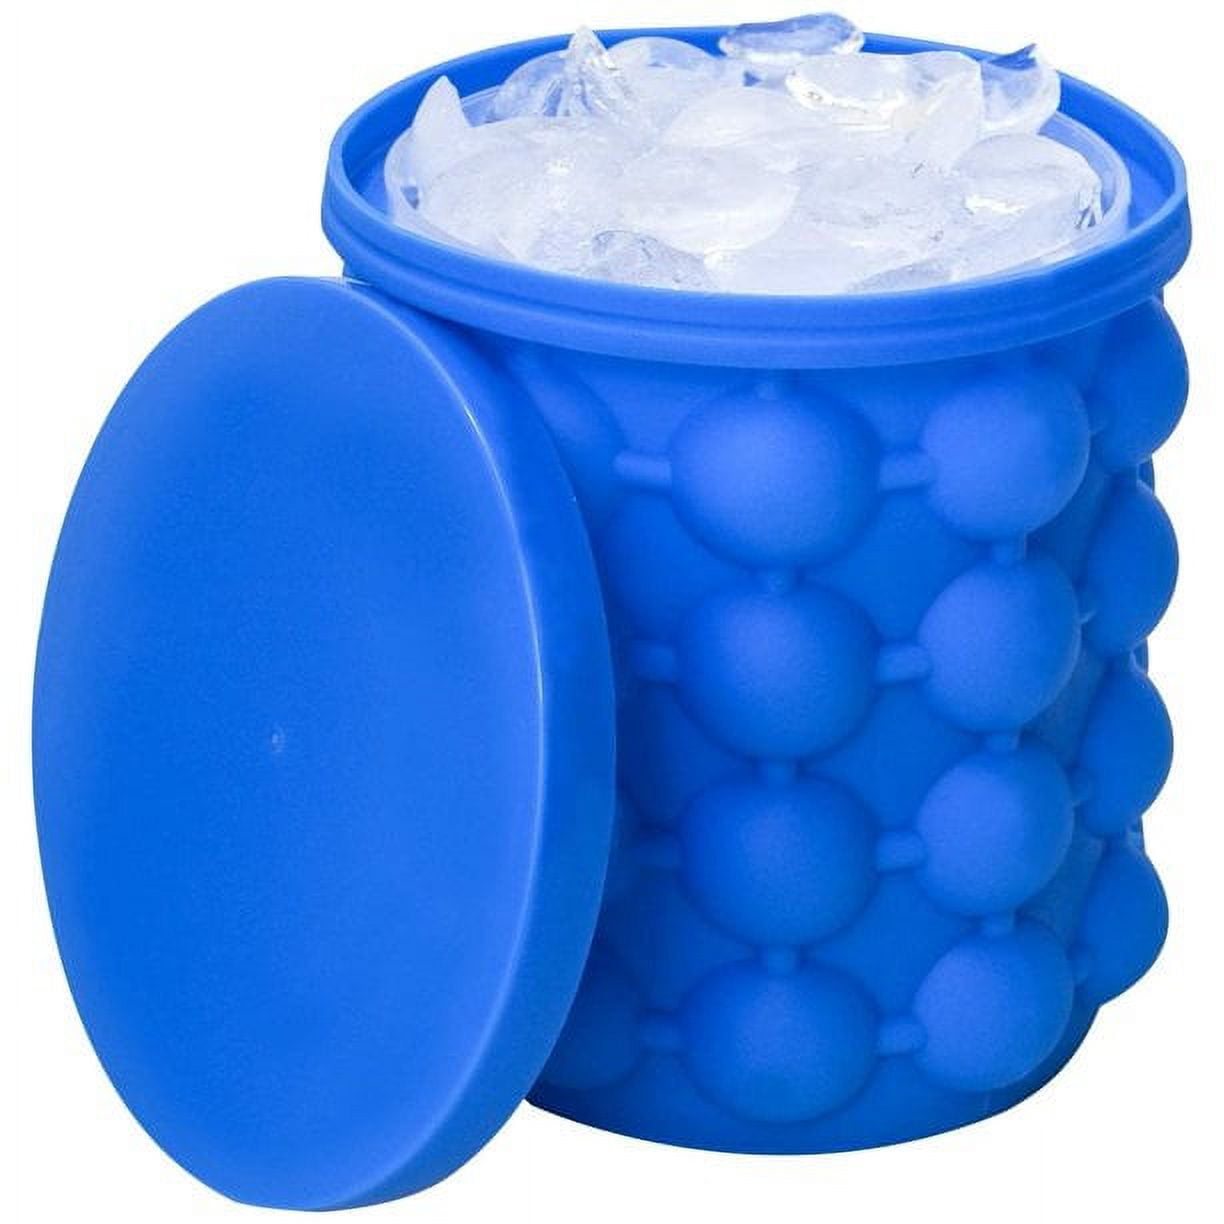 Silicone Ice Bucket Ice Mold with lid, Portable Space Saving Ice Bucket For  Freezer Cube Maker